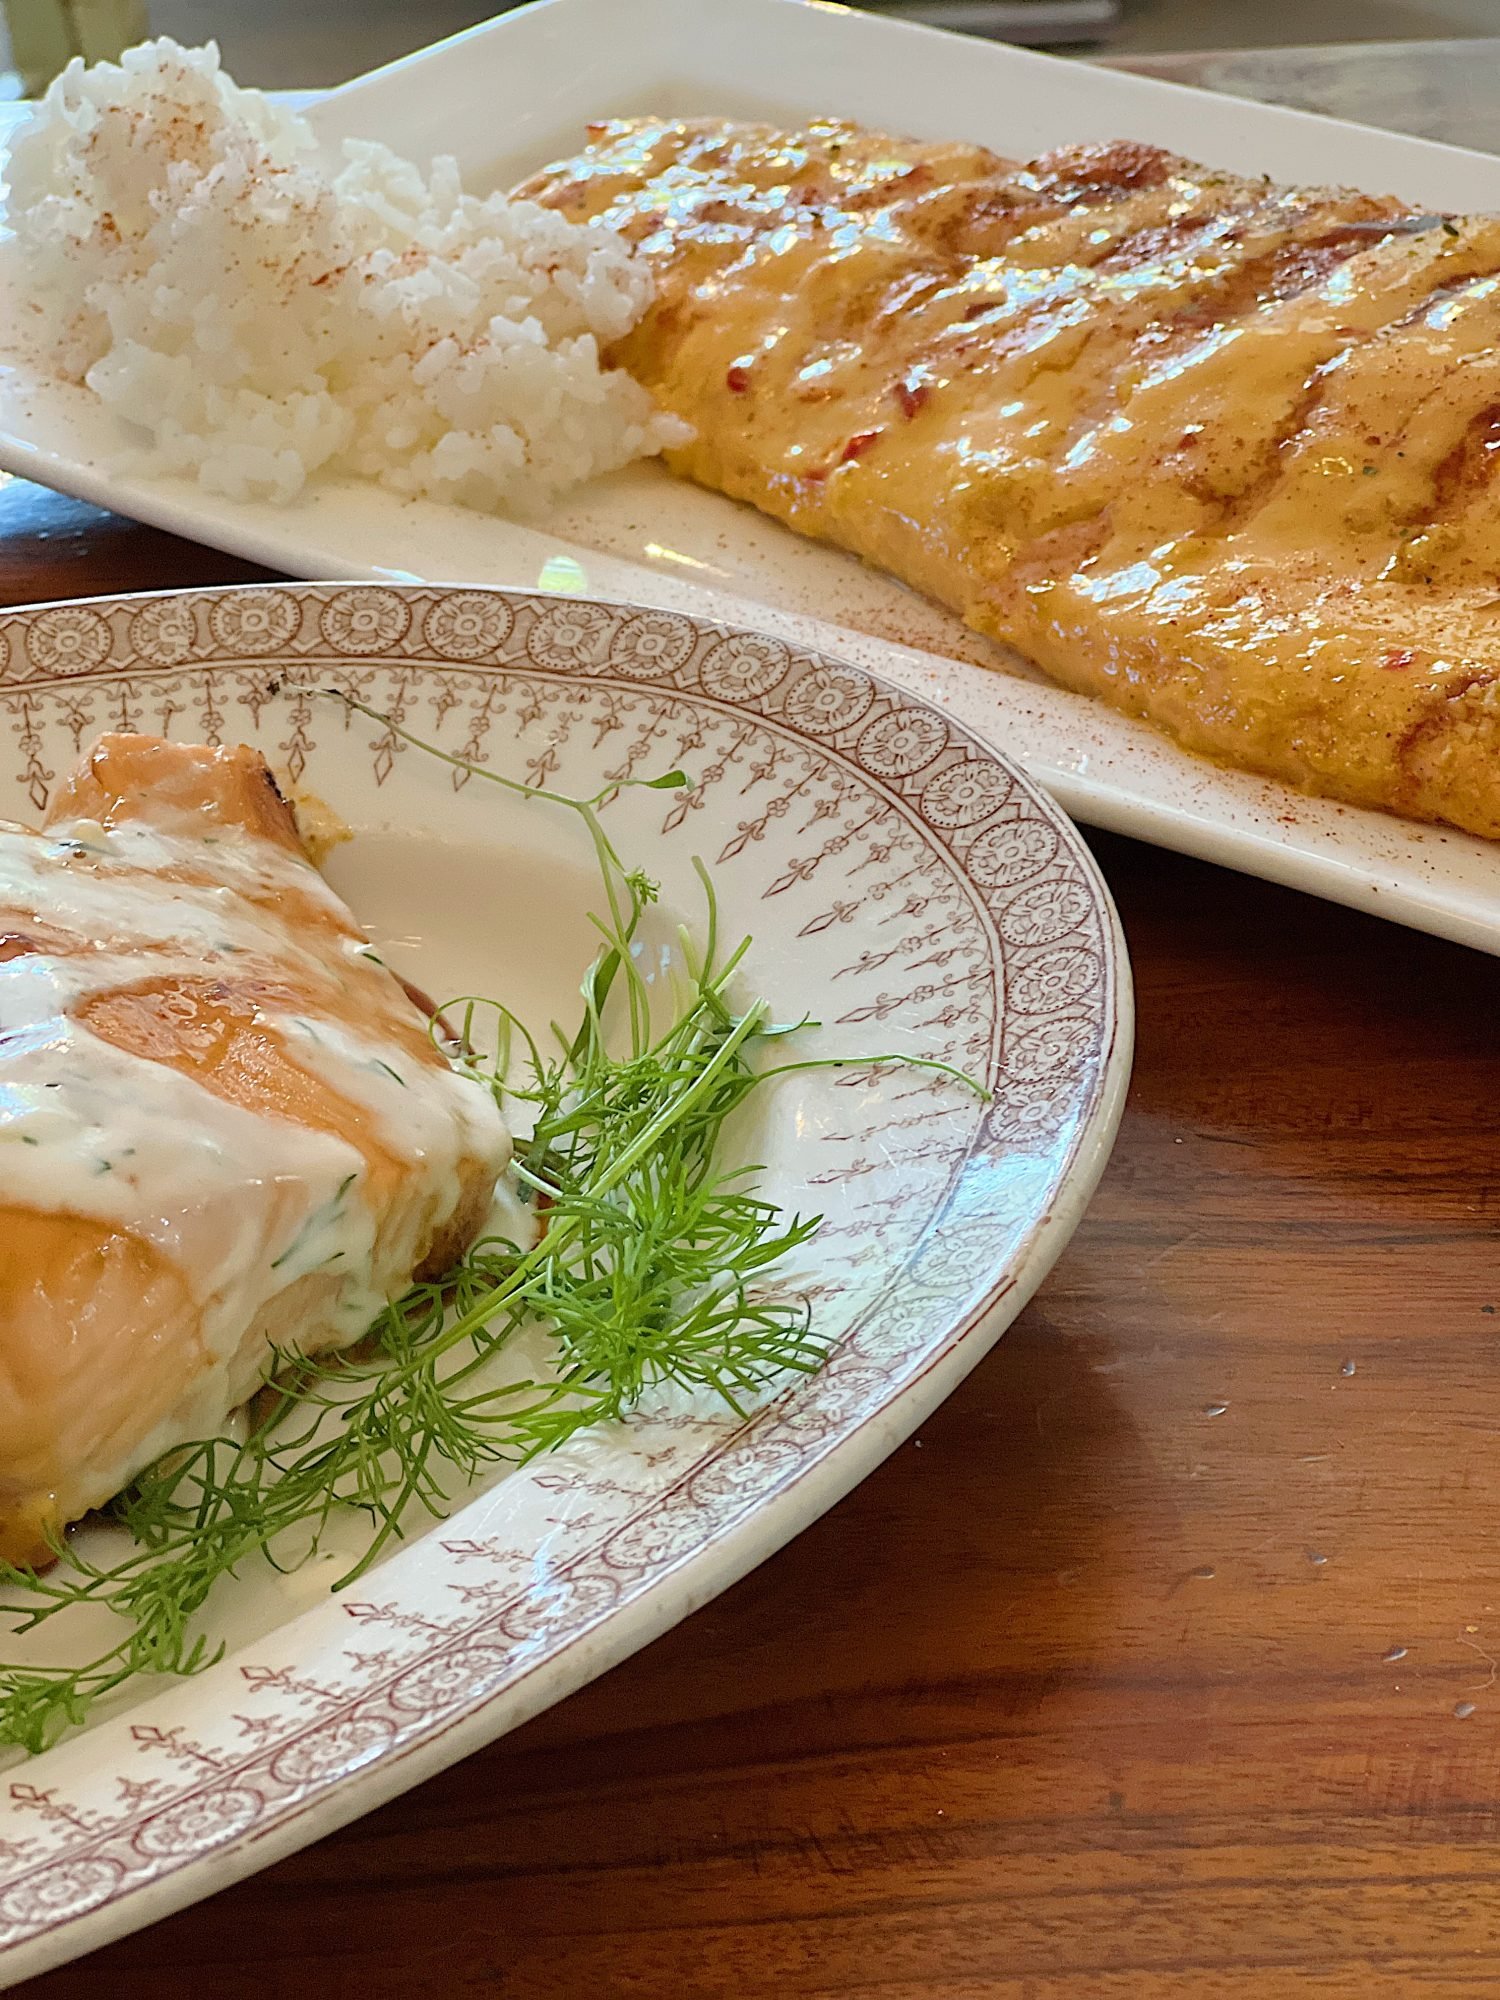 Two plates of salmon including pellet grilled honey salmon with lemon dill sauce and bang bang salmon.